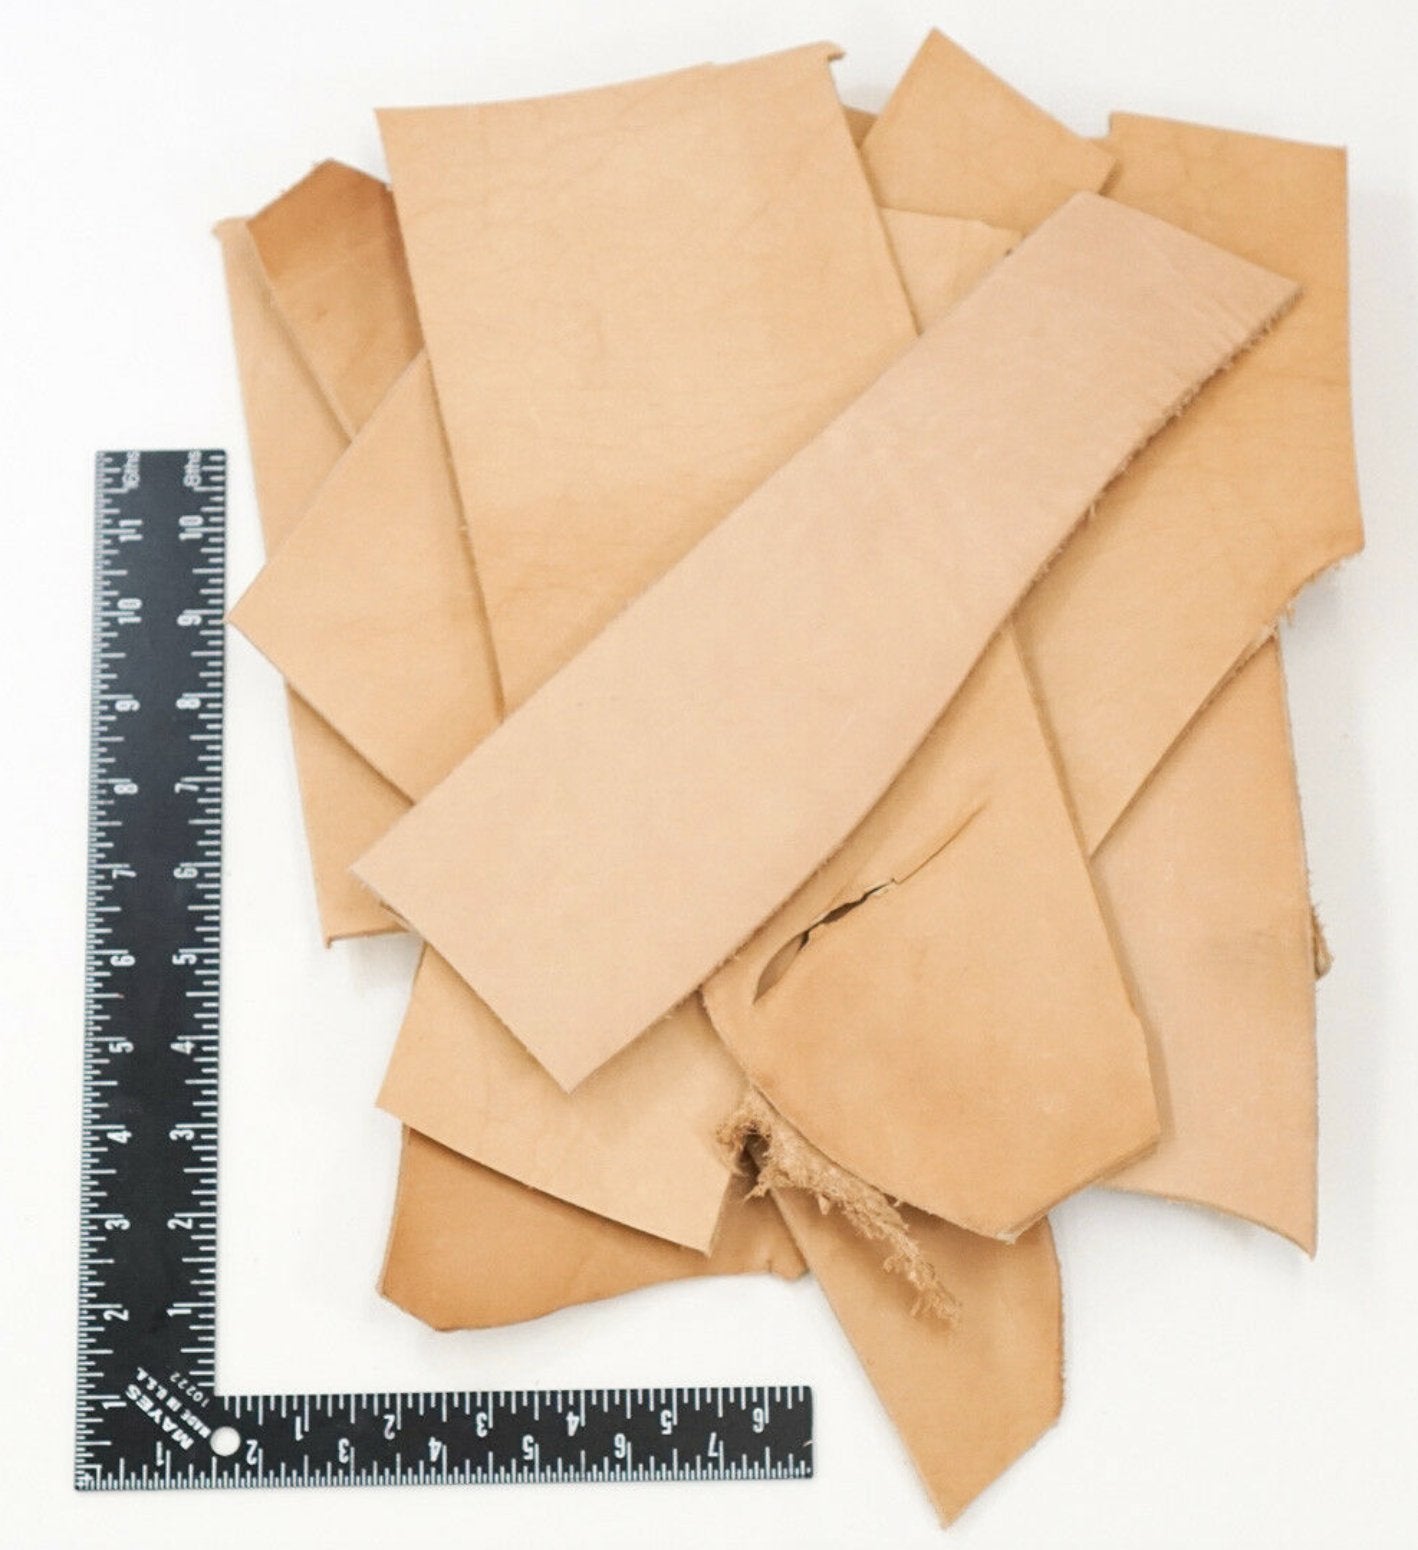 ELW 2LB Vegetable Tan Tooling Cowhide Leather Scraps 6-10 oz. Thickness Pieces